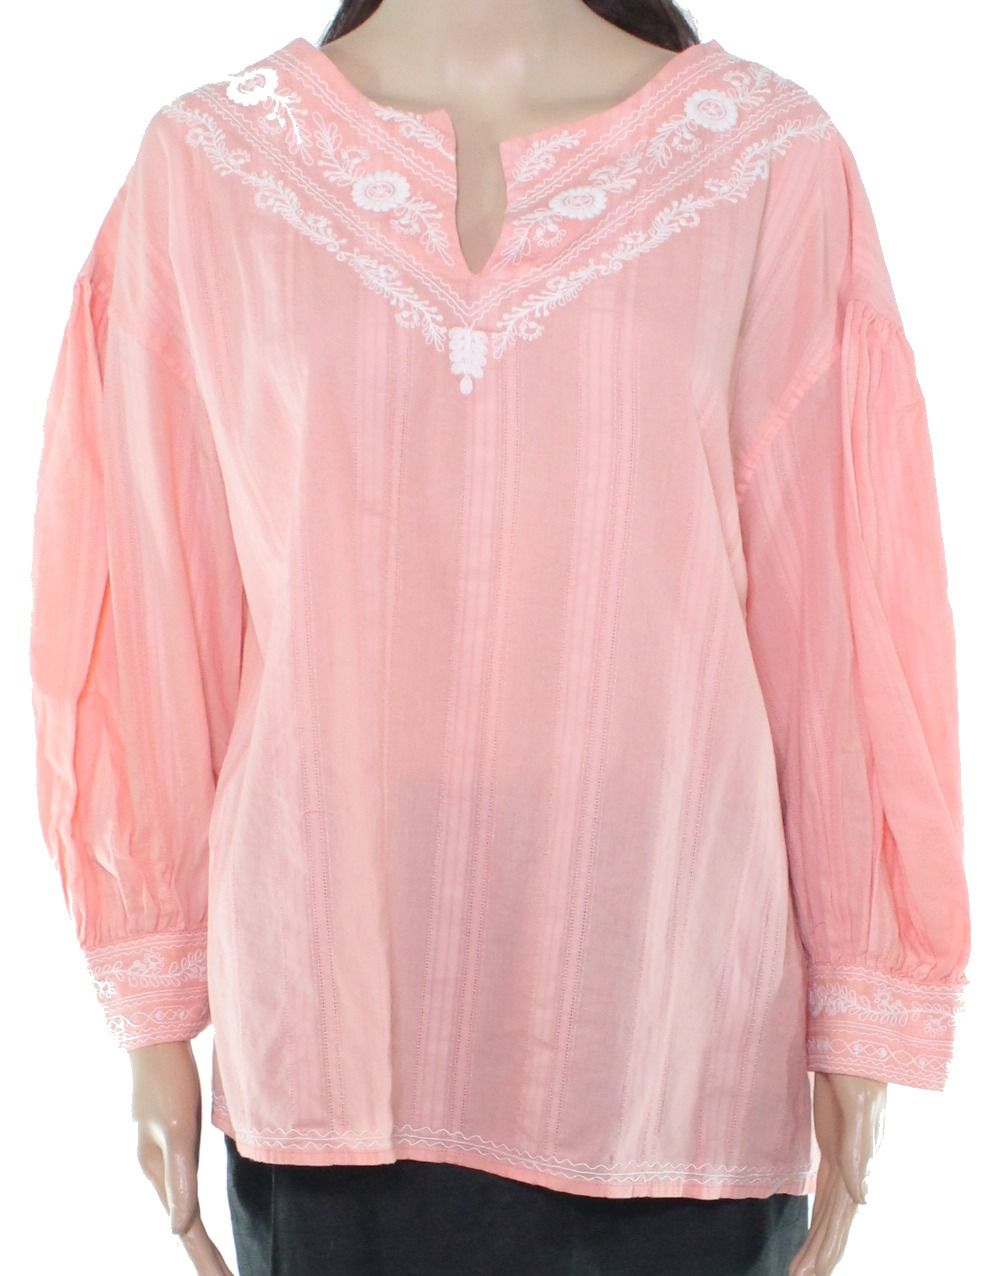 Color: Pinks Size Type: Regular Size (Women's): L Sleeve Length: Long Sleeve Type: Button-Up Style: Basic Neckline: V-Neck Pattern: Floral Theme: Designer Material: 100% Cotton